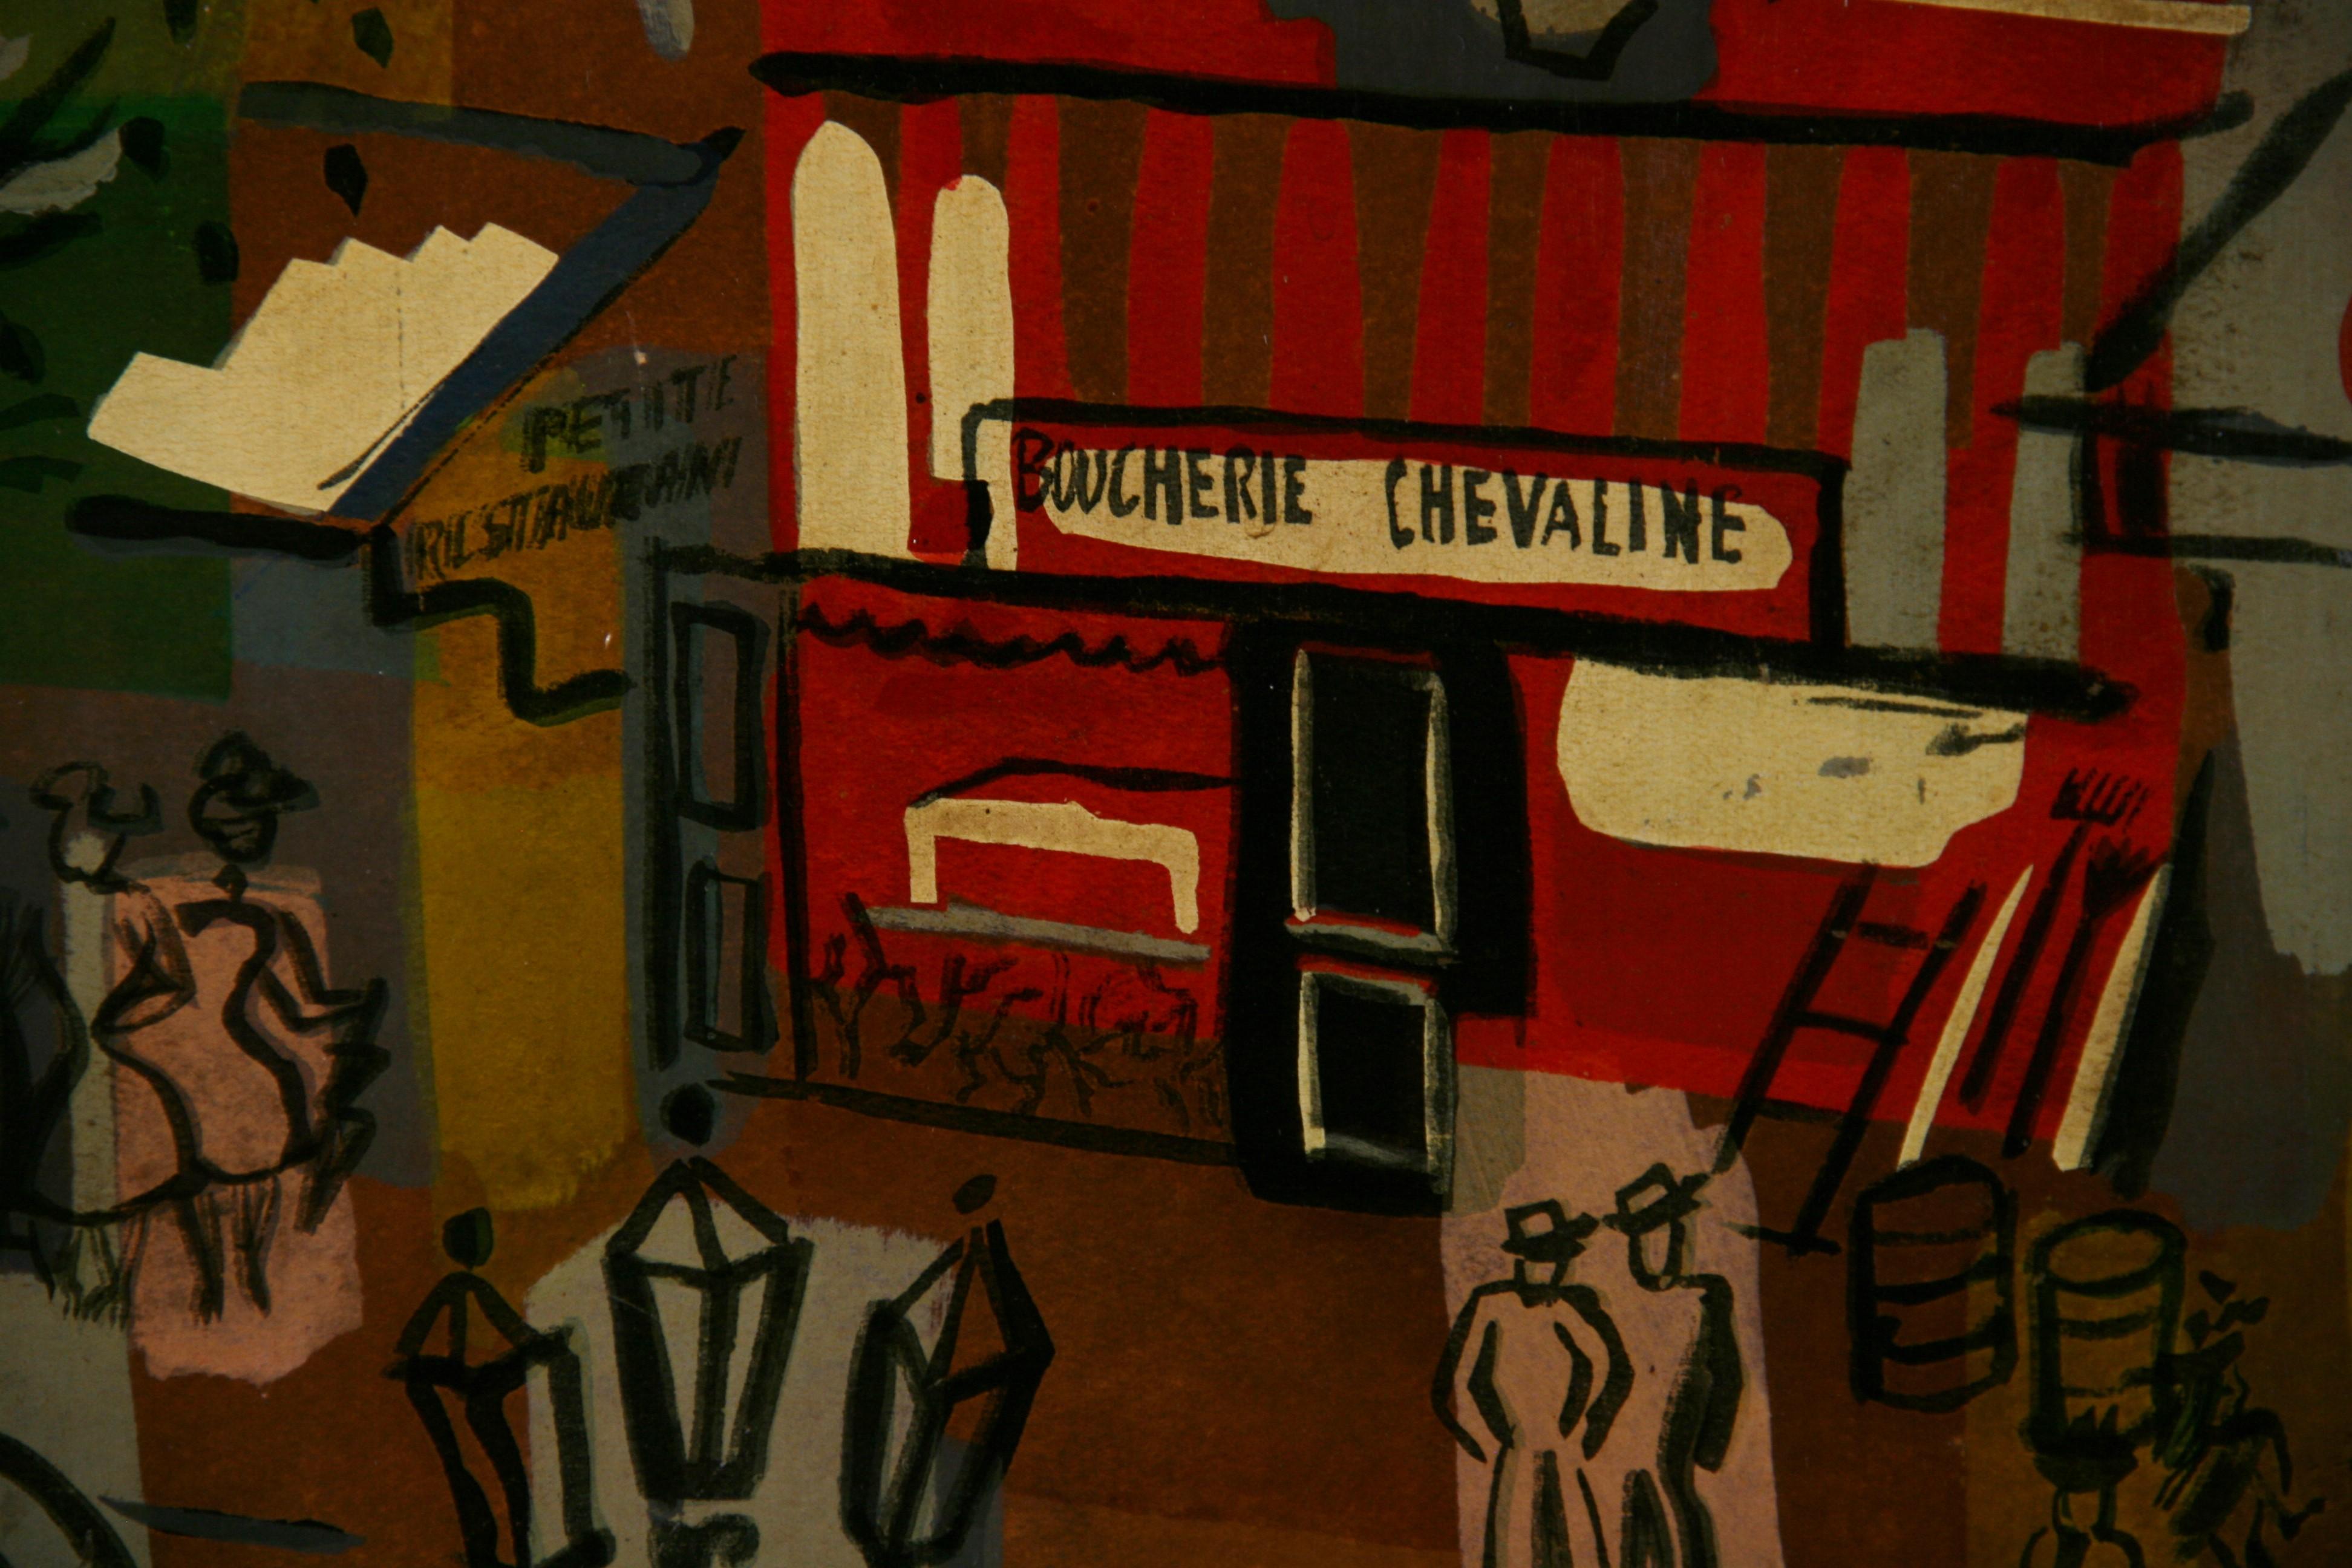 Large Modern Fauvist French  City Street by Cobelle 1960 - Brown Figurative Painting by Charles Cobelle